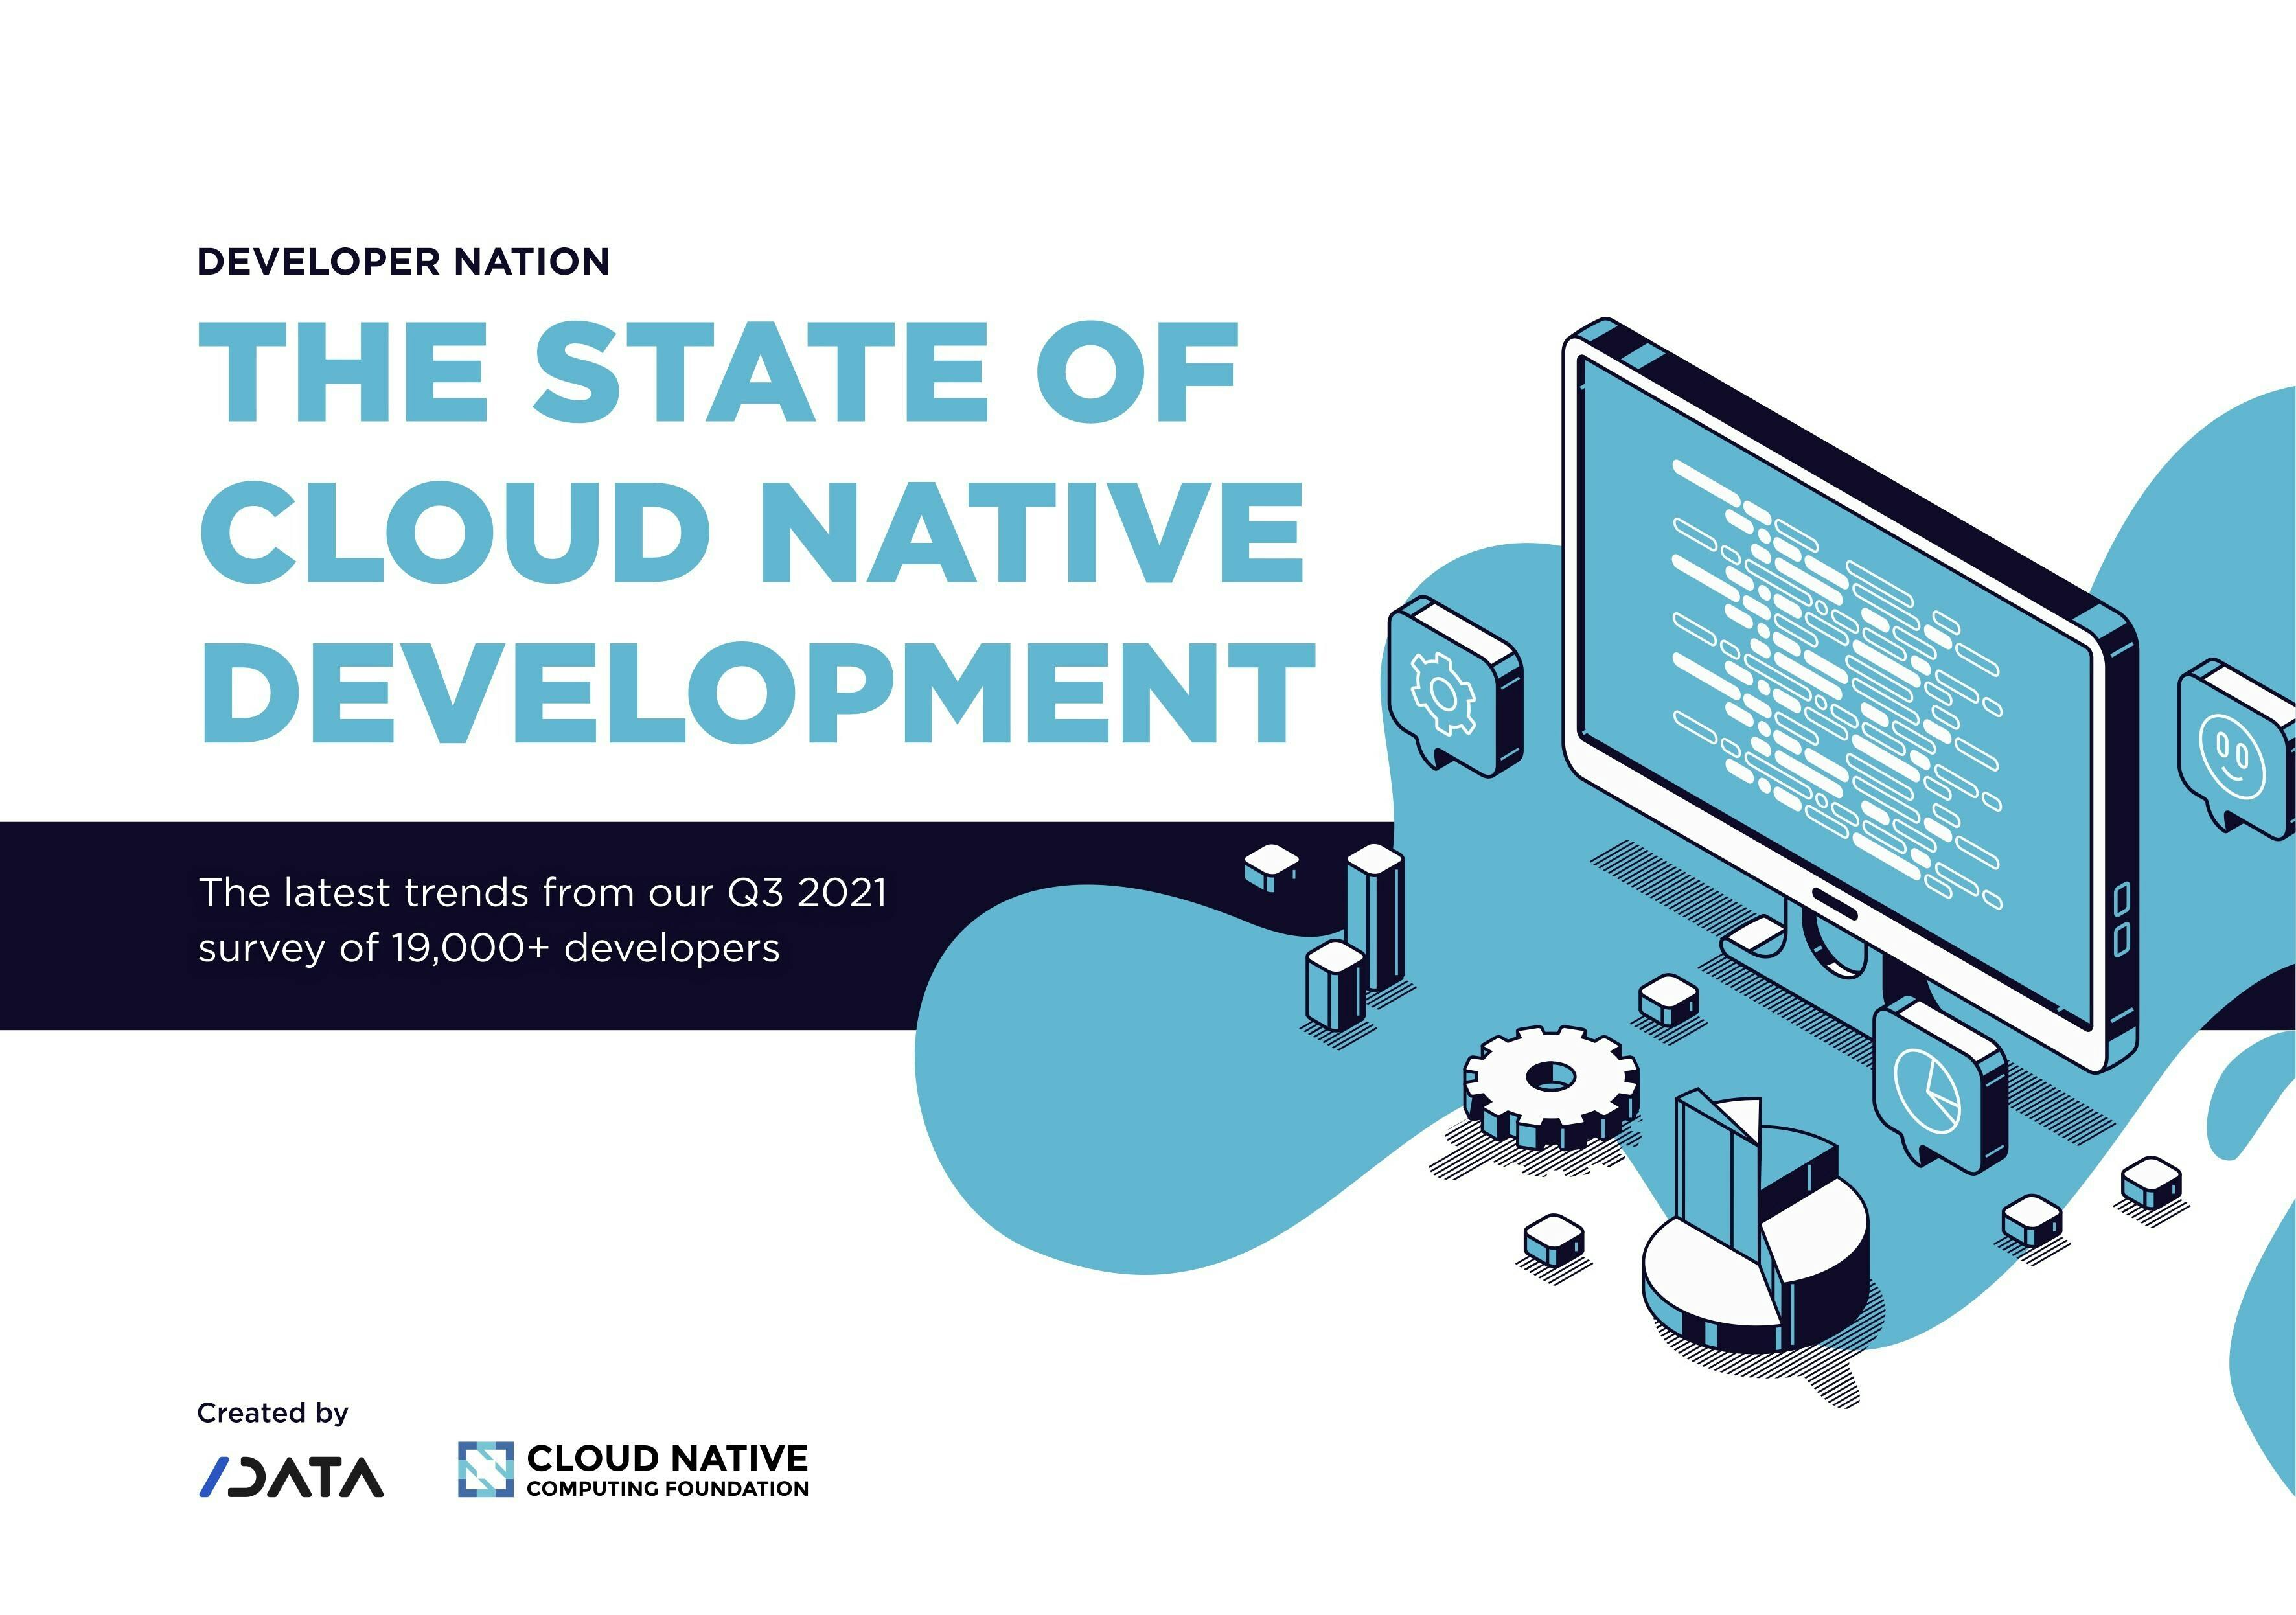 The State of Cloud Native Development 